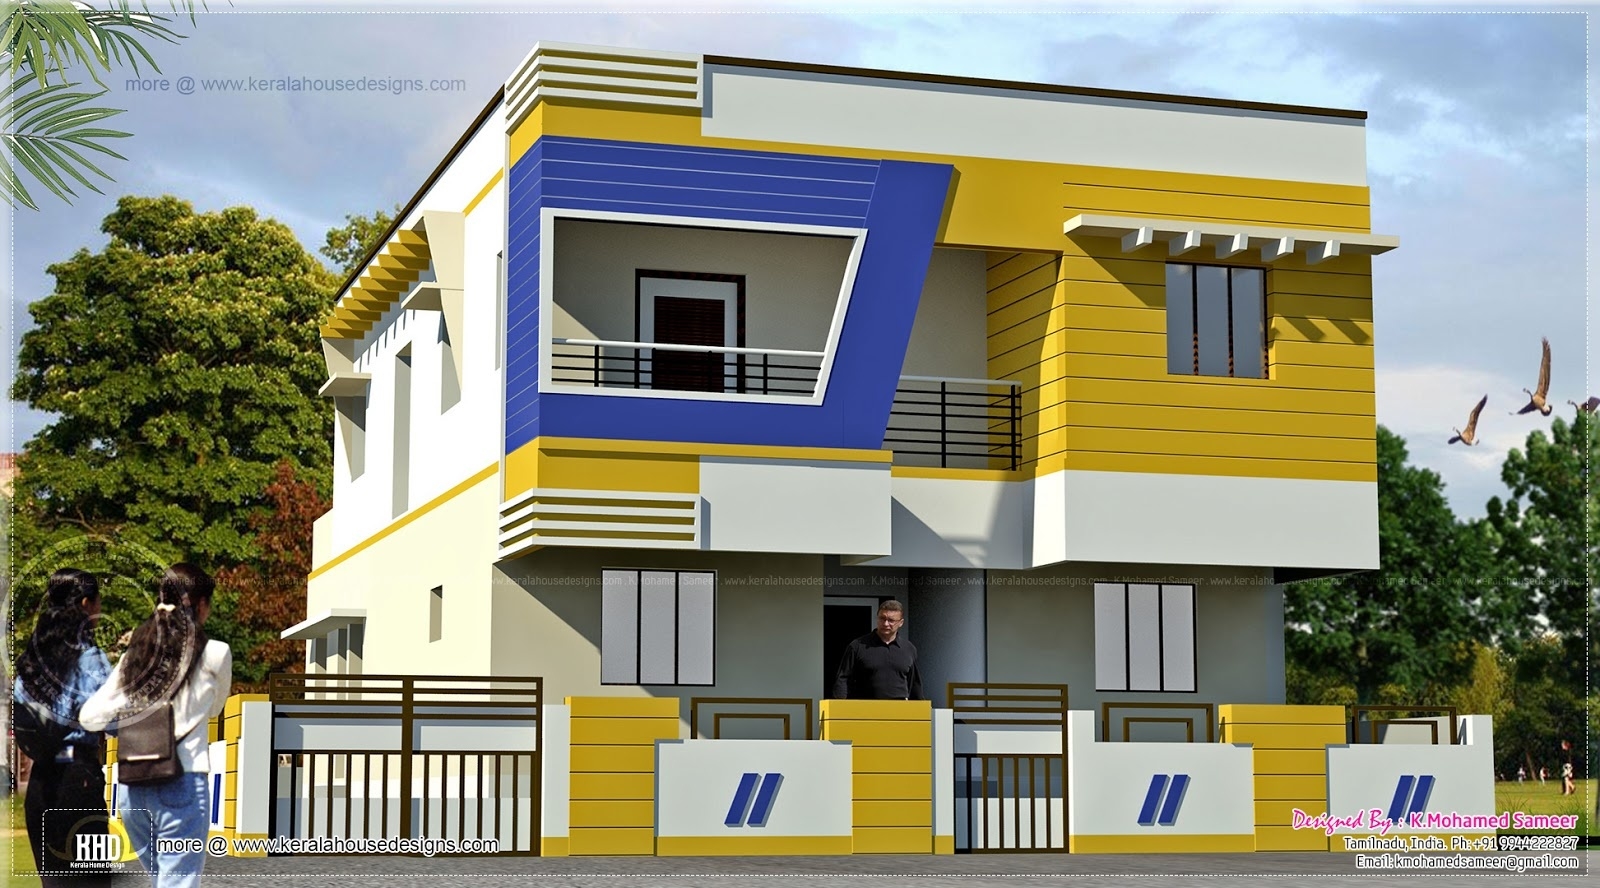 Incredible modern tamilnadu style house design kerala home design and floor plans with house plan tamil